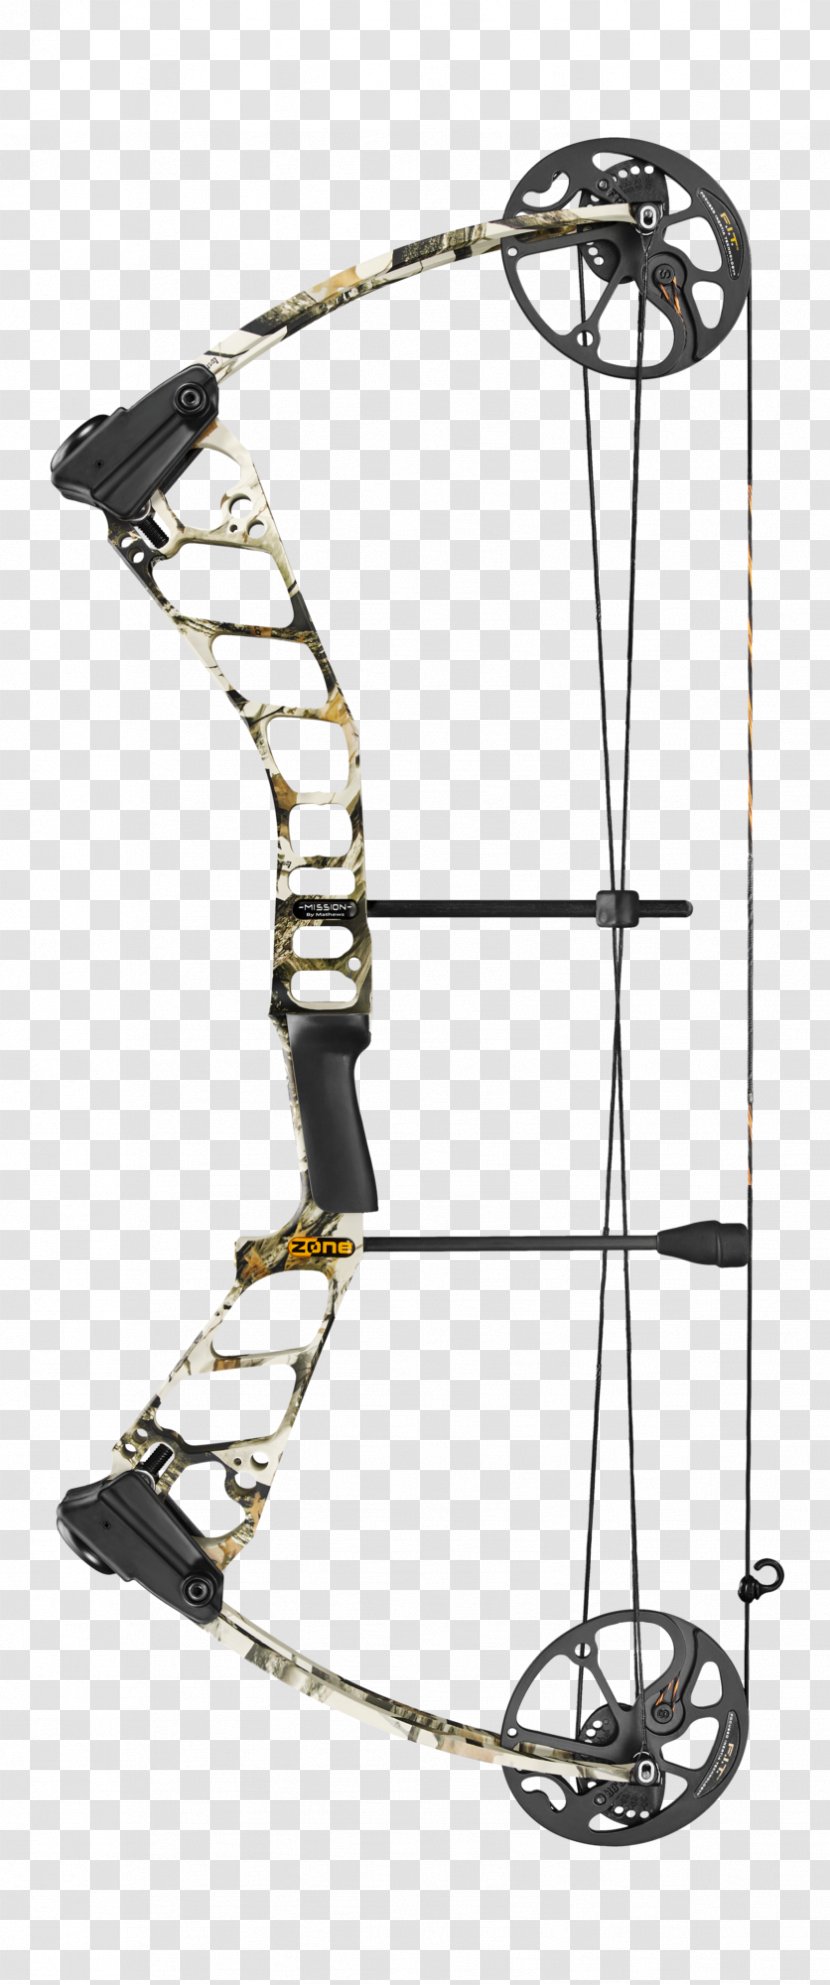 Compound Bows Archery Bow And Arrow Bowhunting - Finger Tab - Madden 70 Percent Off Zone Transparent PNG